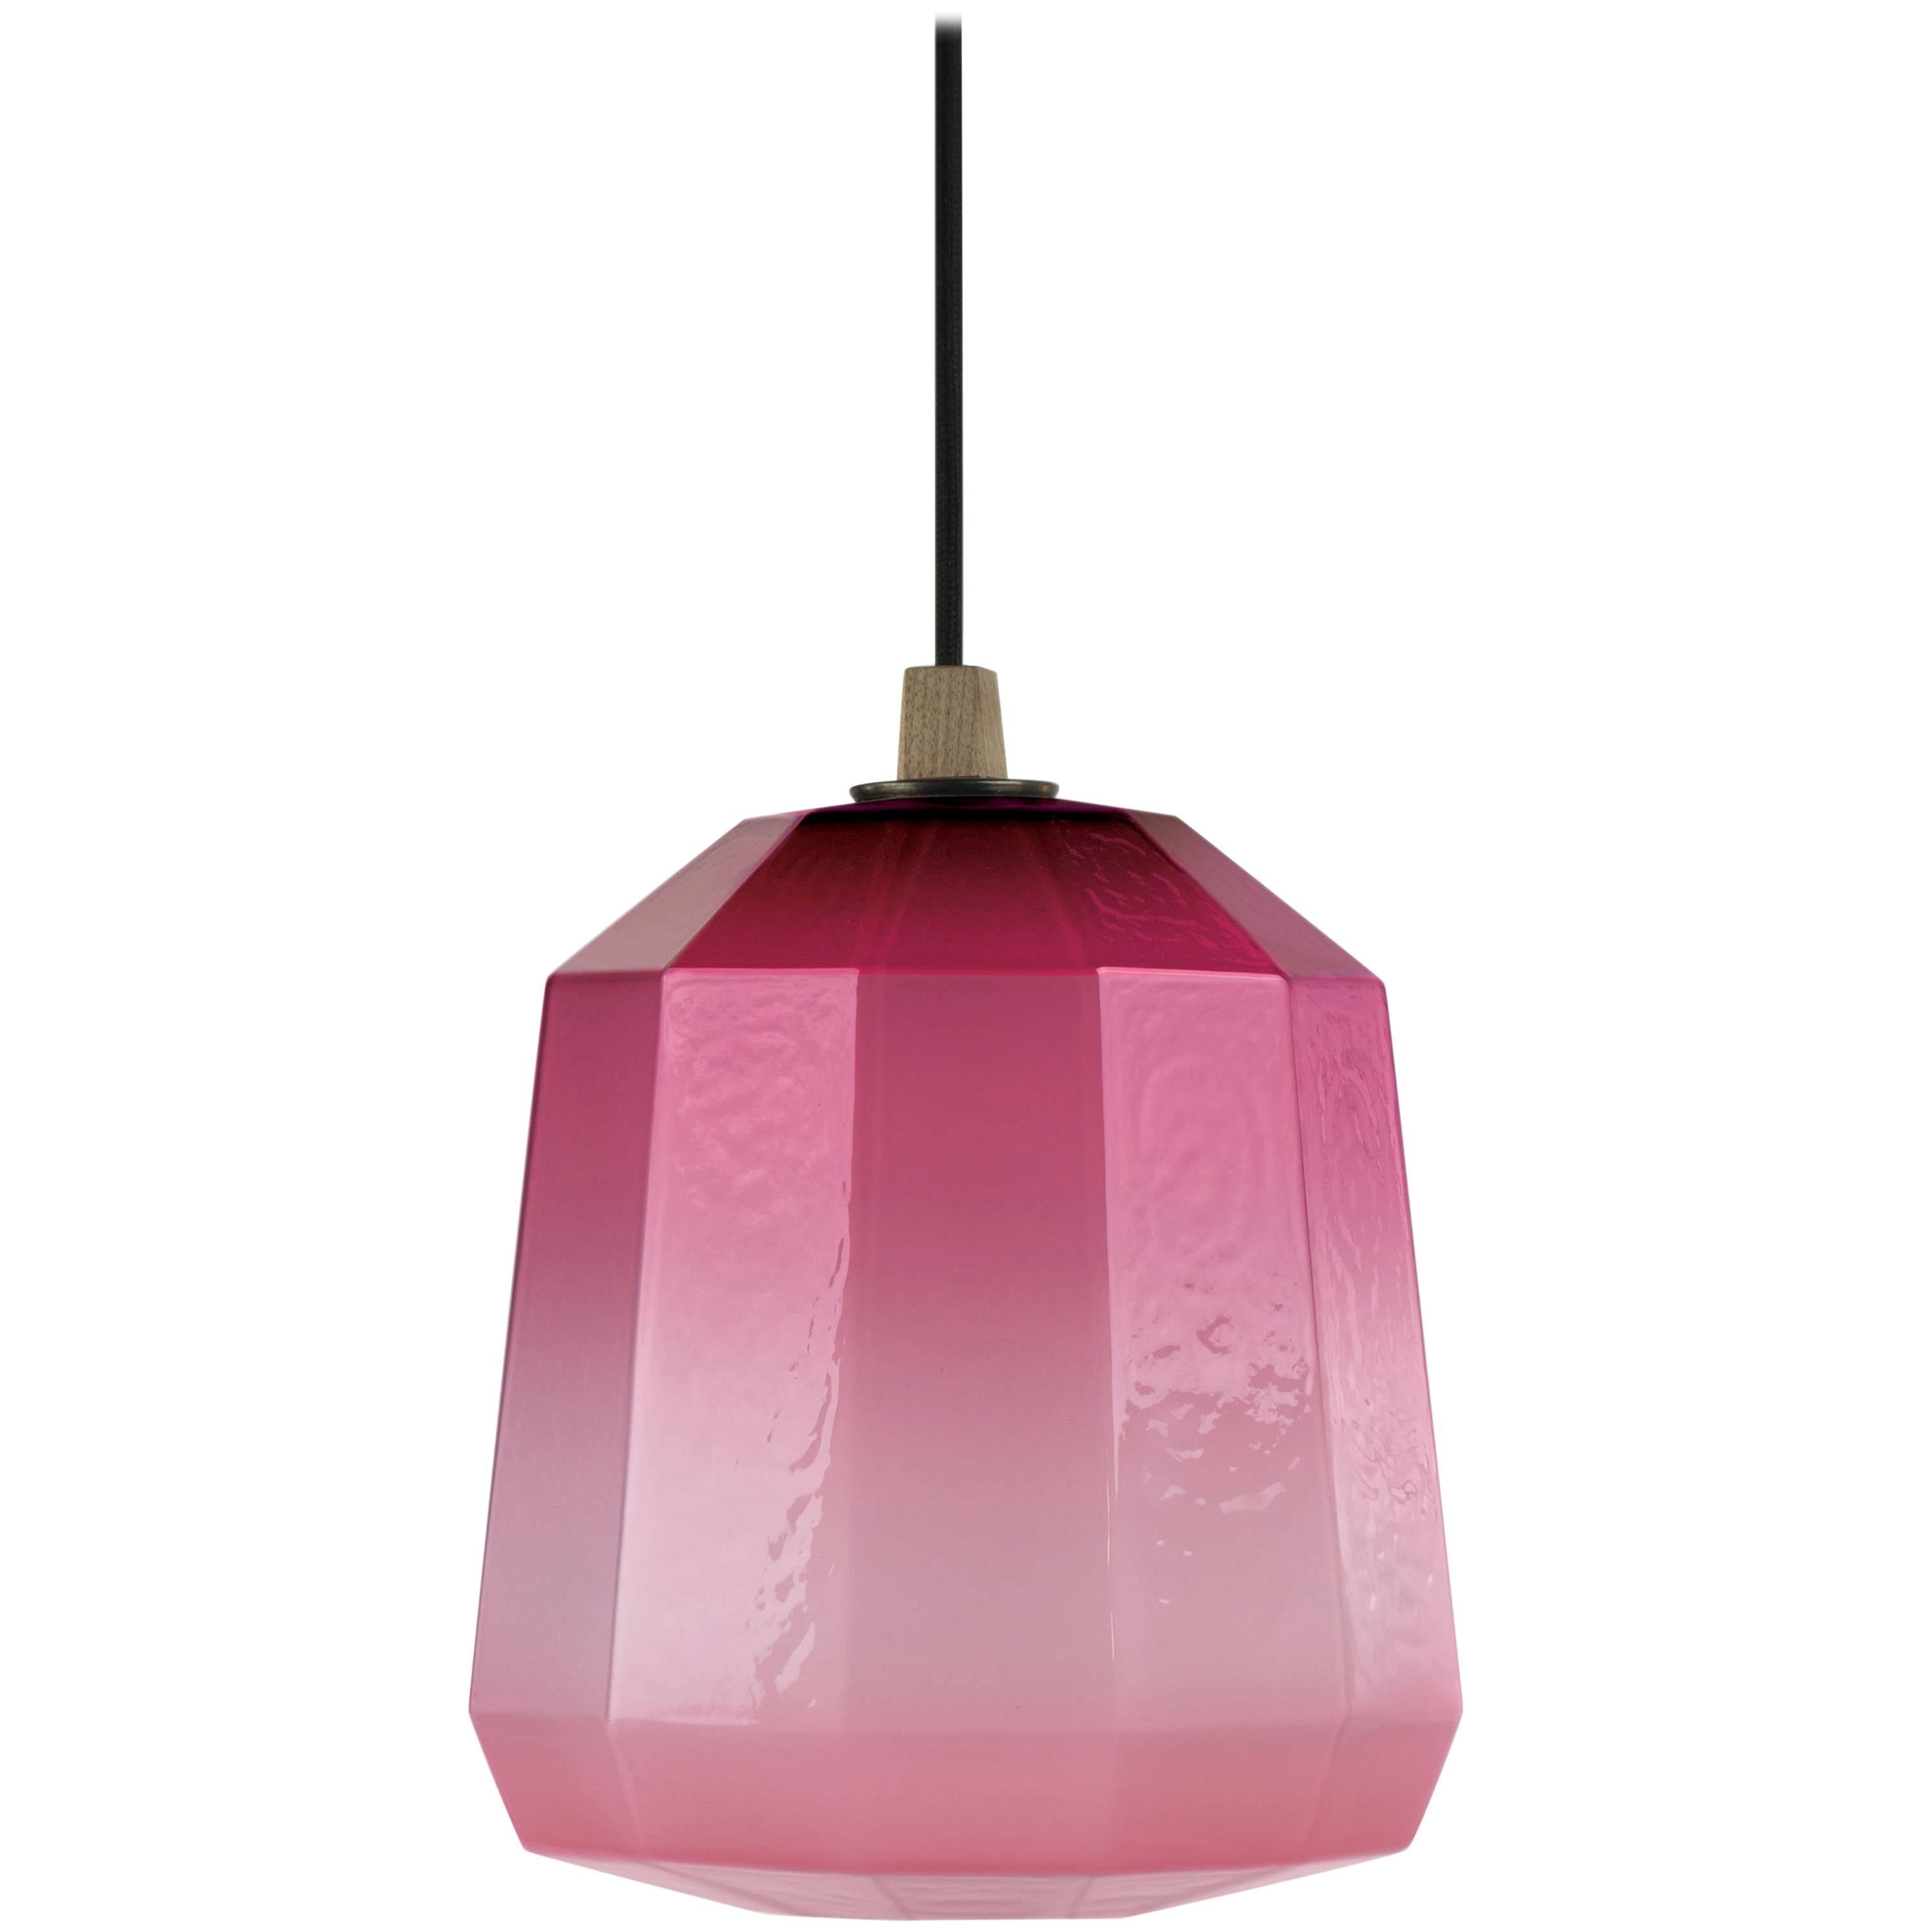 Tokenlights Poly Pop Pendant For Sale